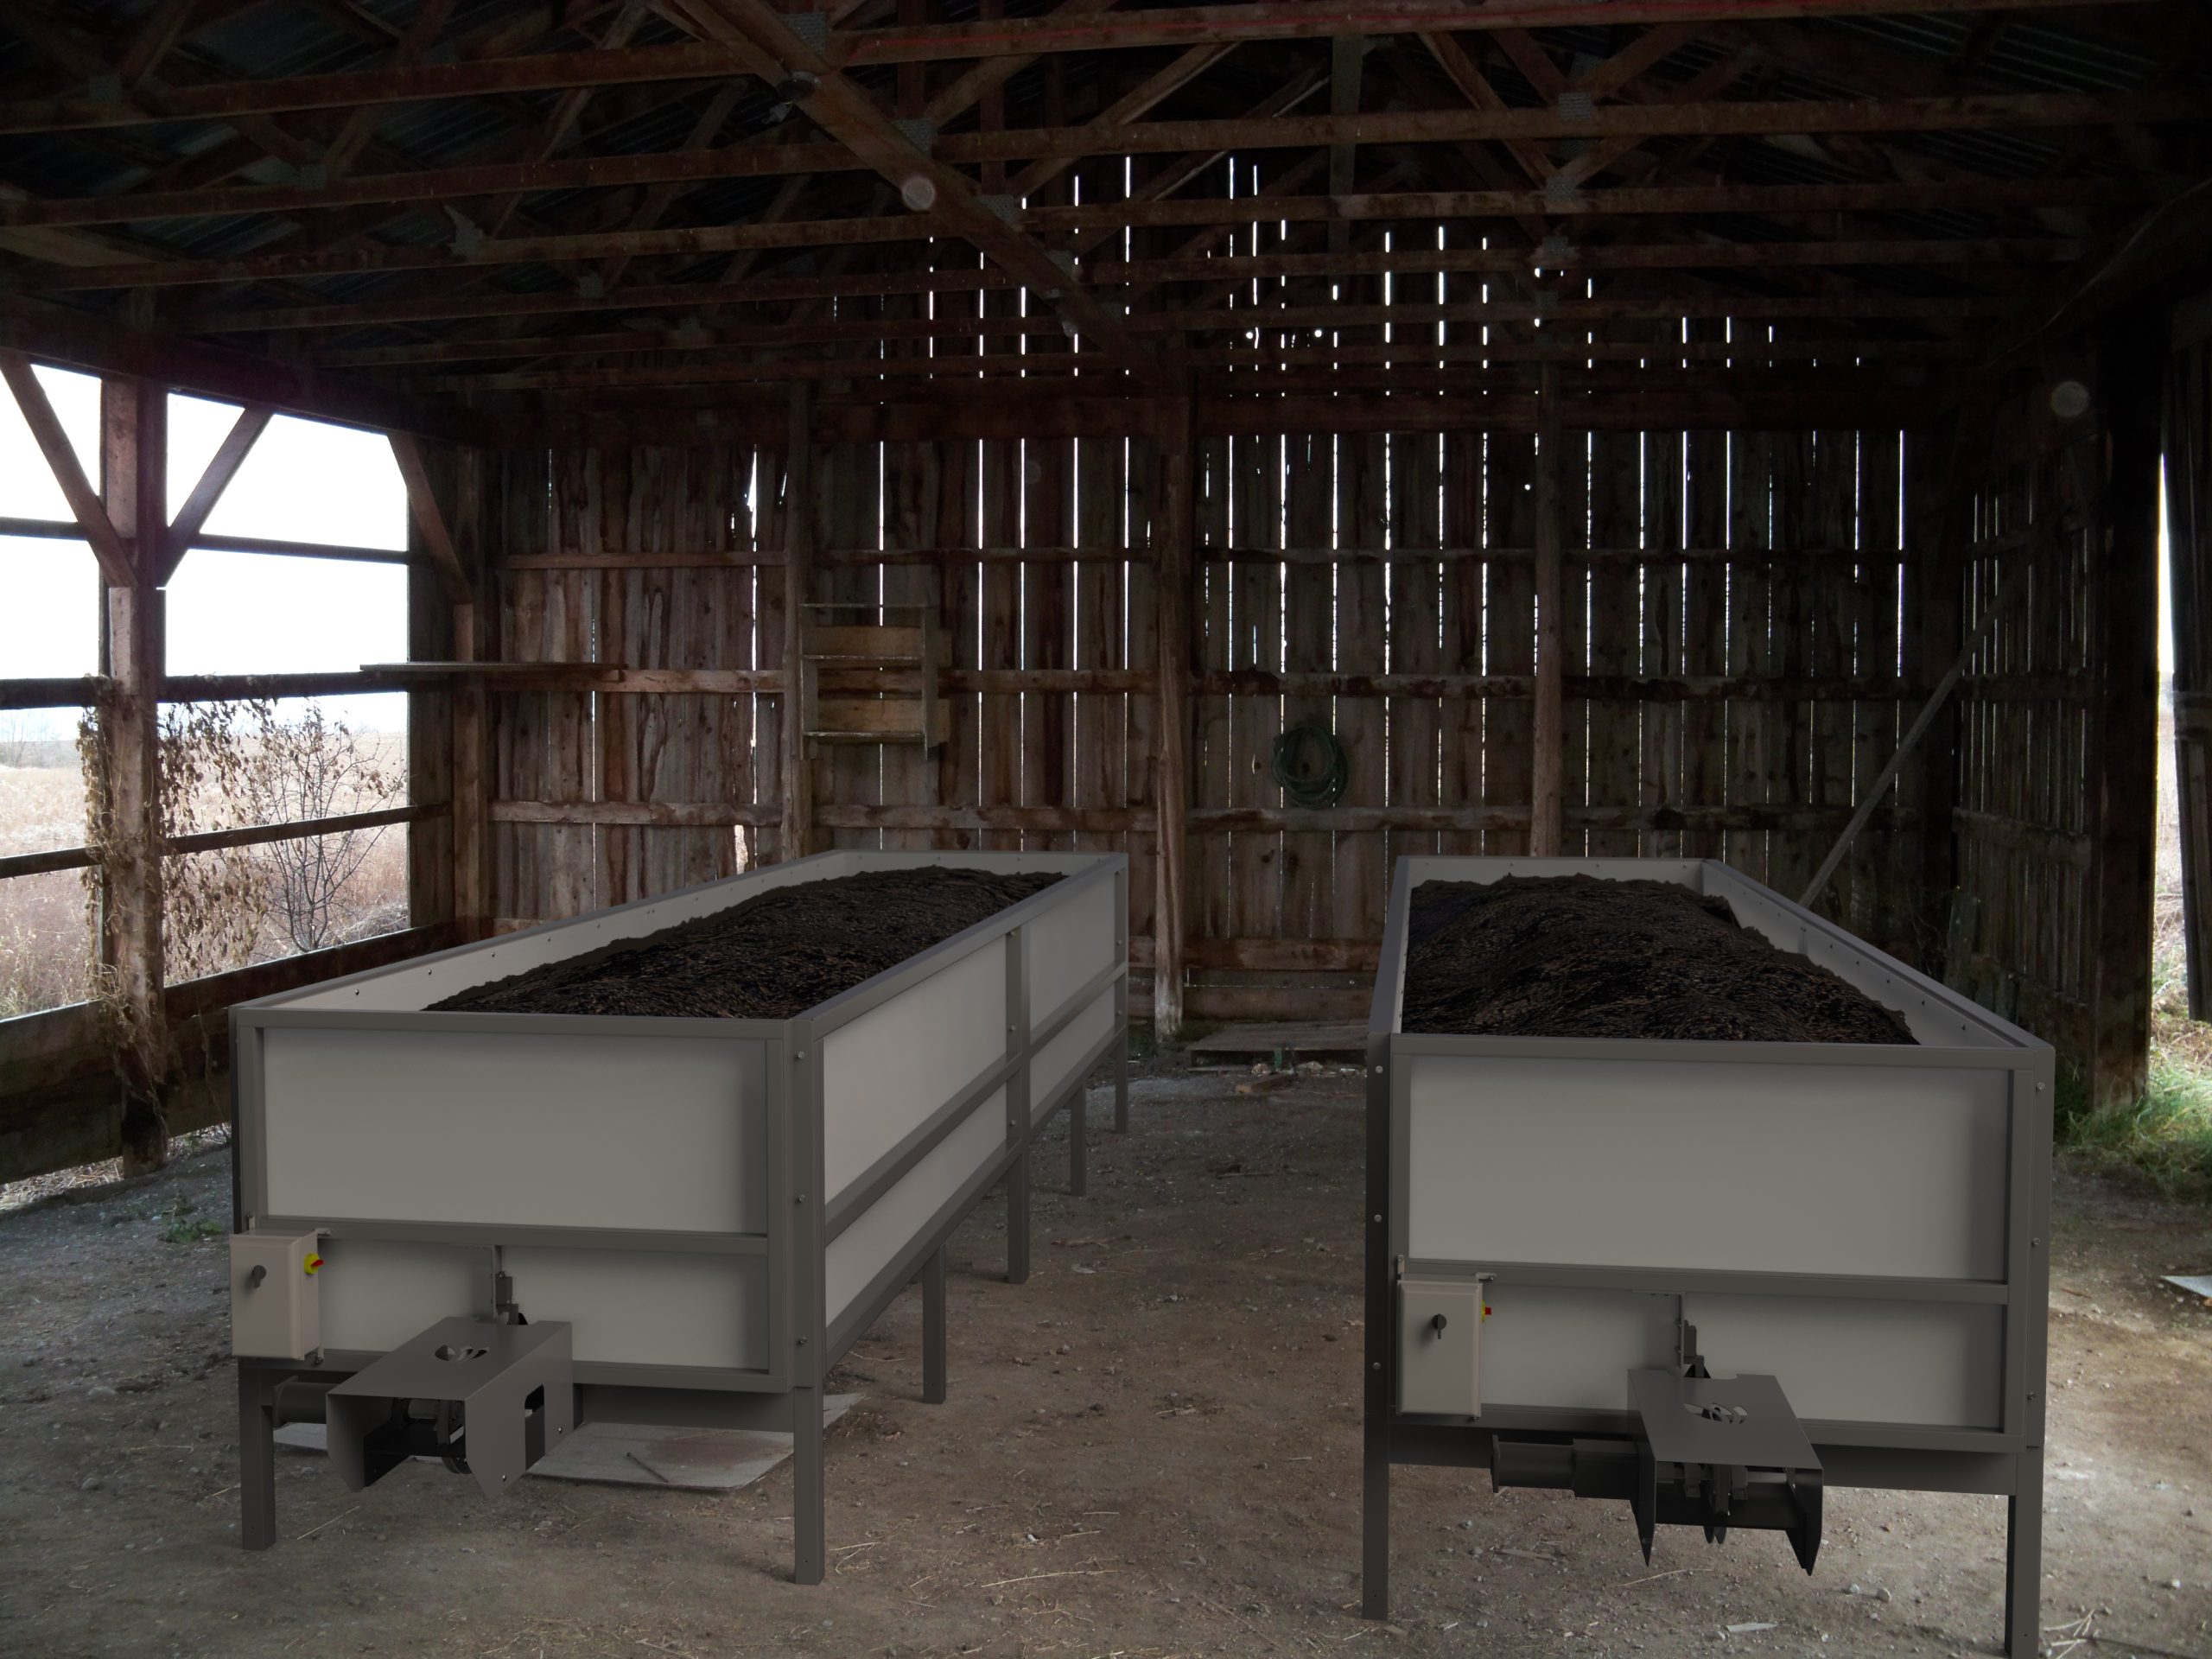 vermicomposting in a barn using two Wormgear CFT systems